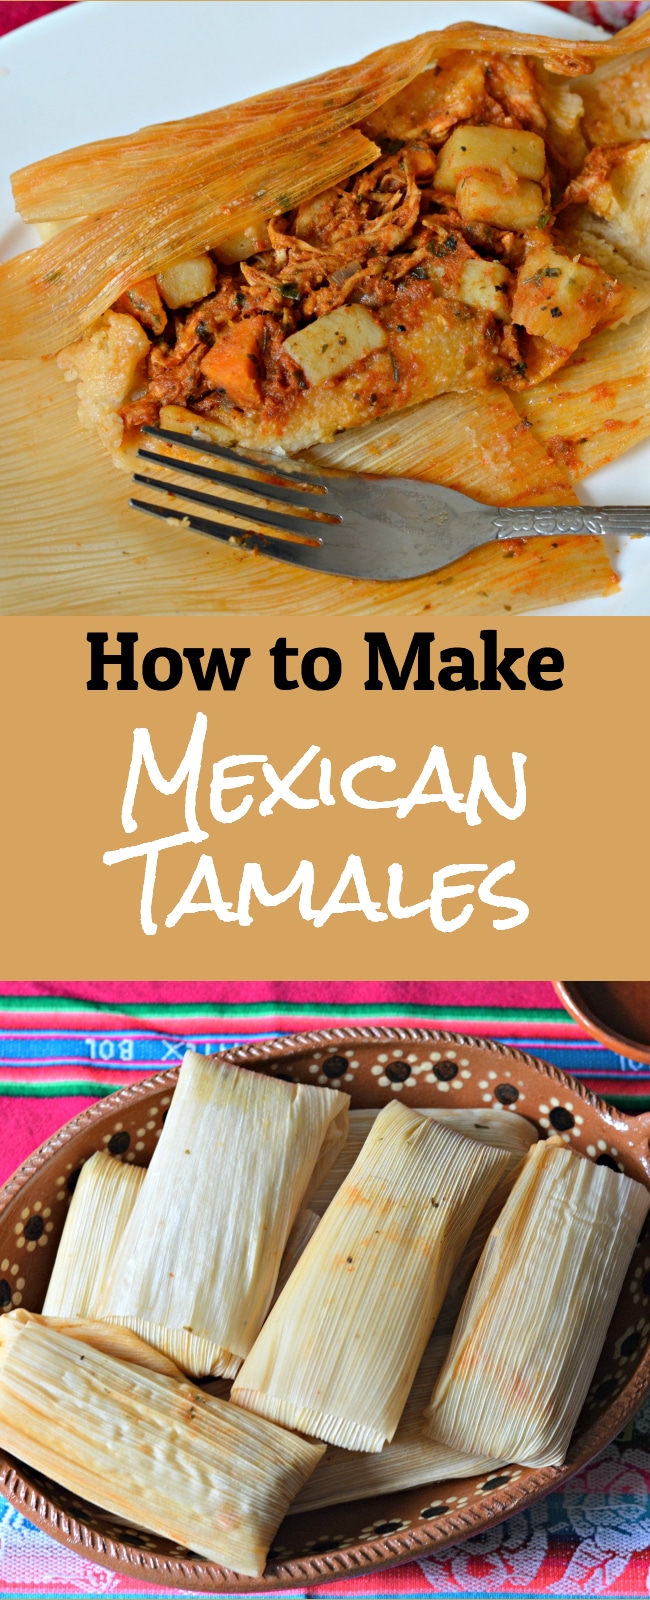 When you finish reading this post, you will know how to make the most delicious, authentic Mexican Tamales, which will make you very popular. 